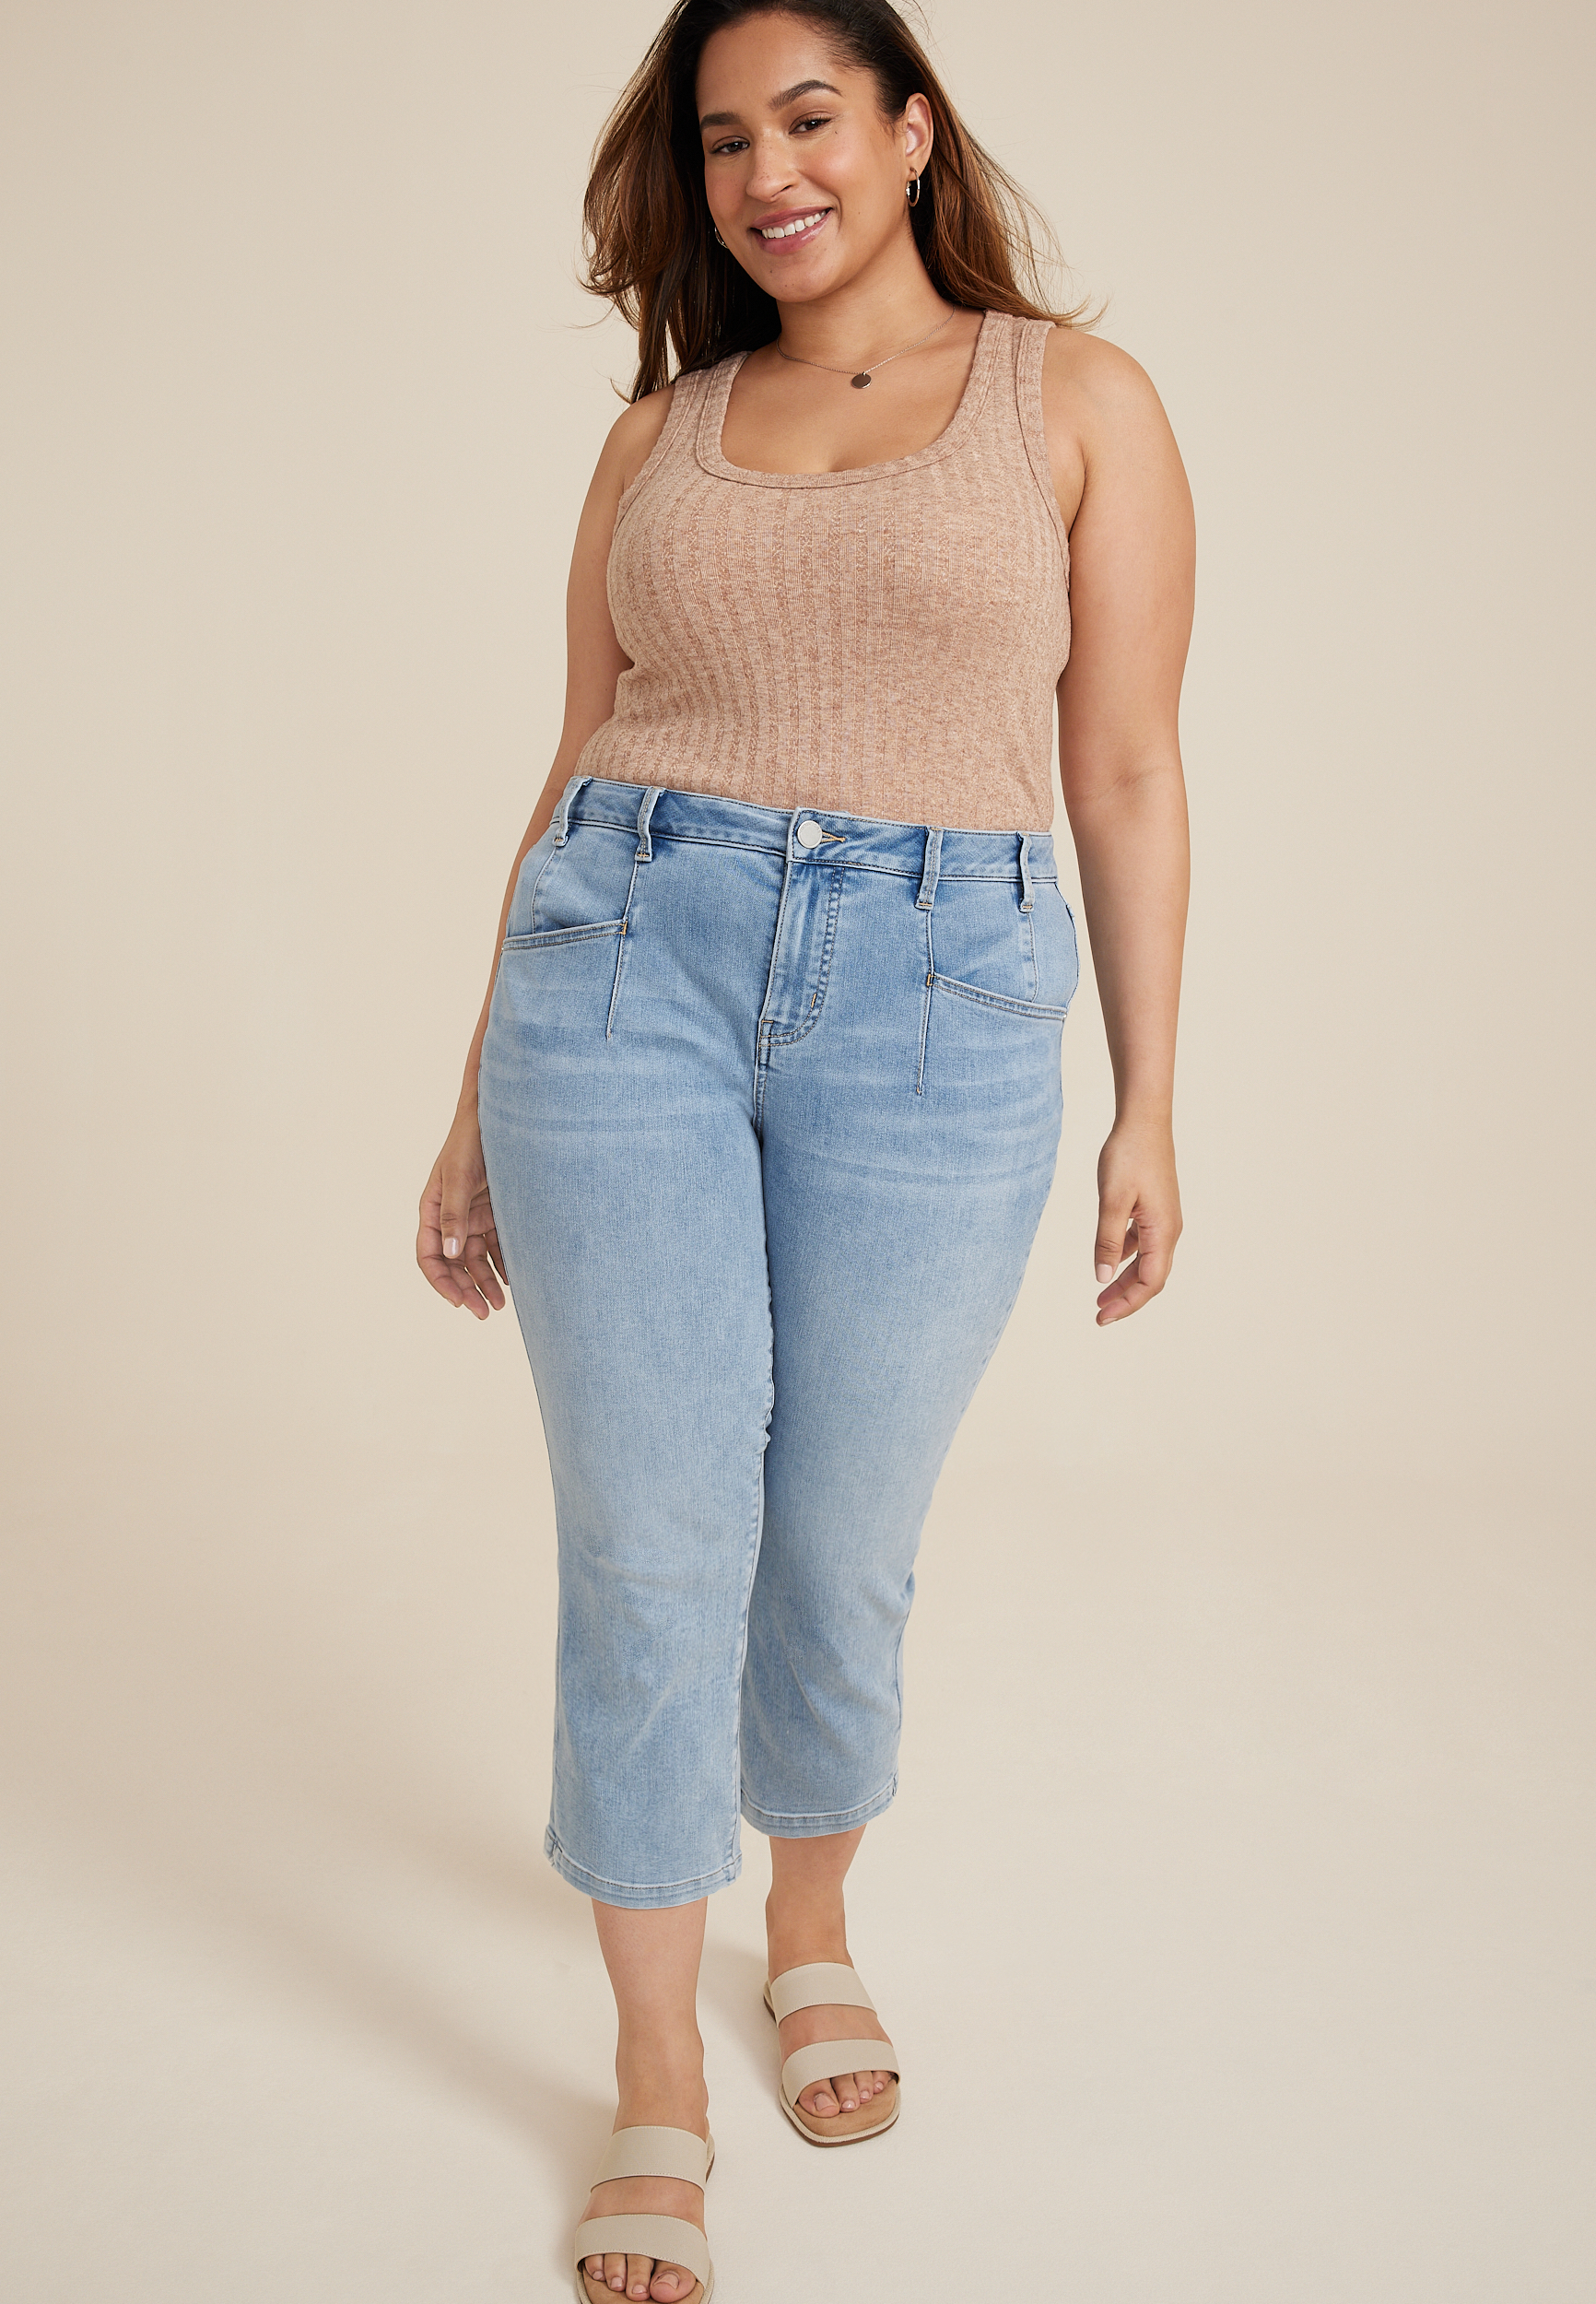 Plus Size m jeans by maurices™ Everflex™ Curvy High Rise Slim Boot